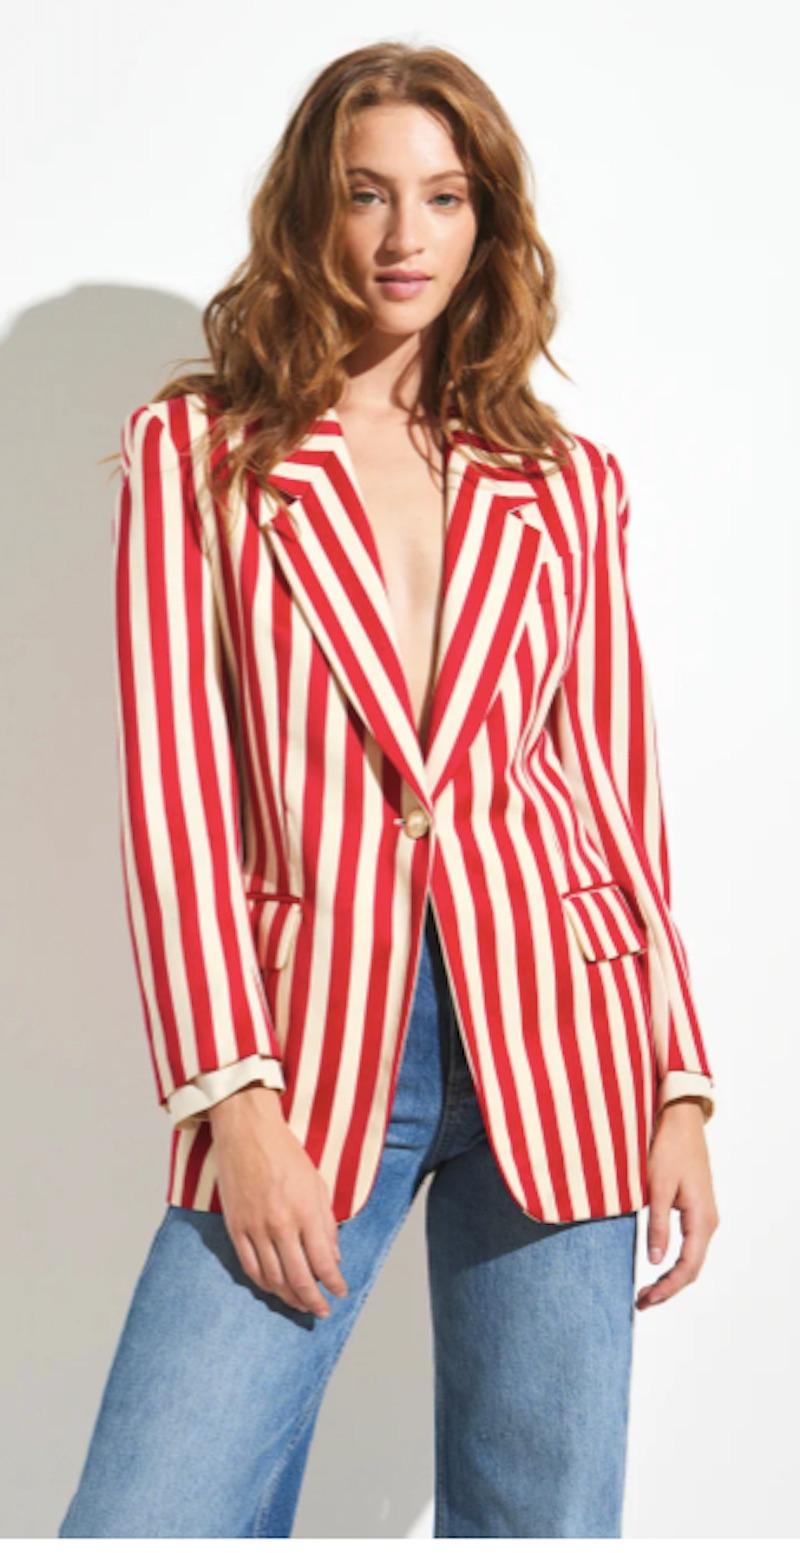 Playful red and white striped blazer with faux shirt sleeves at cuffs and strong gold buttons. 
Shoulders 16 in
Bust 36 in
Waist 32 in
Length 29 in
Sleeve 24 in
Marked Size US 6
Good Vintage Condition. Can accommodate sizes XS-M. 
Model is 5 ft 9.5